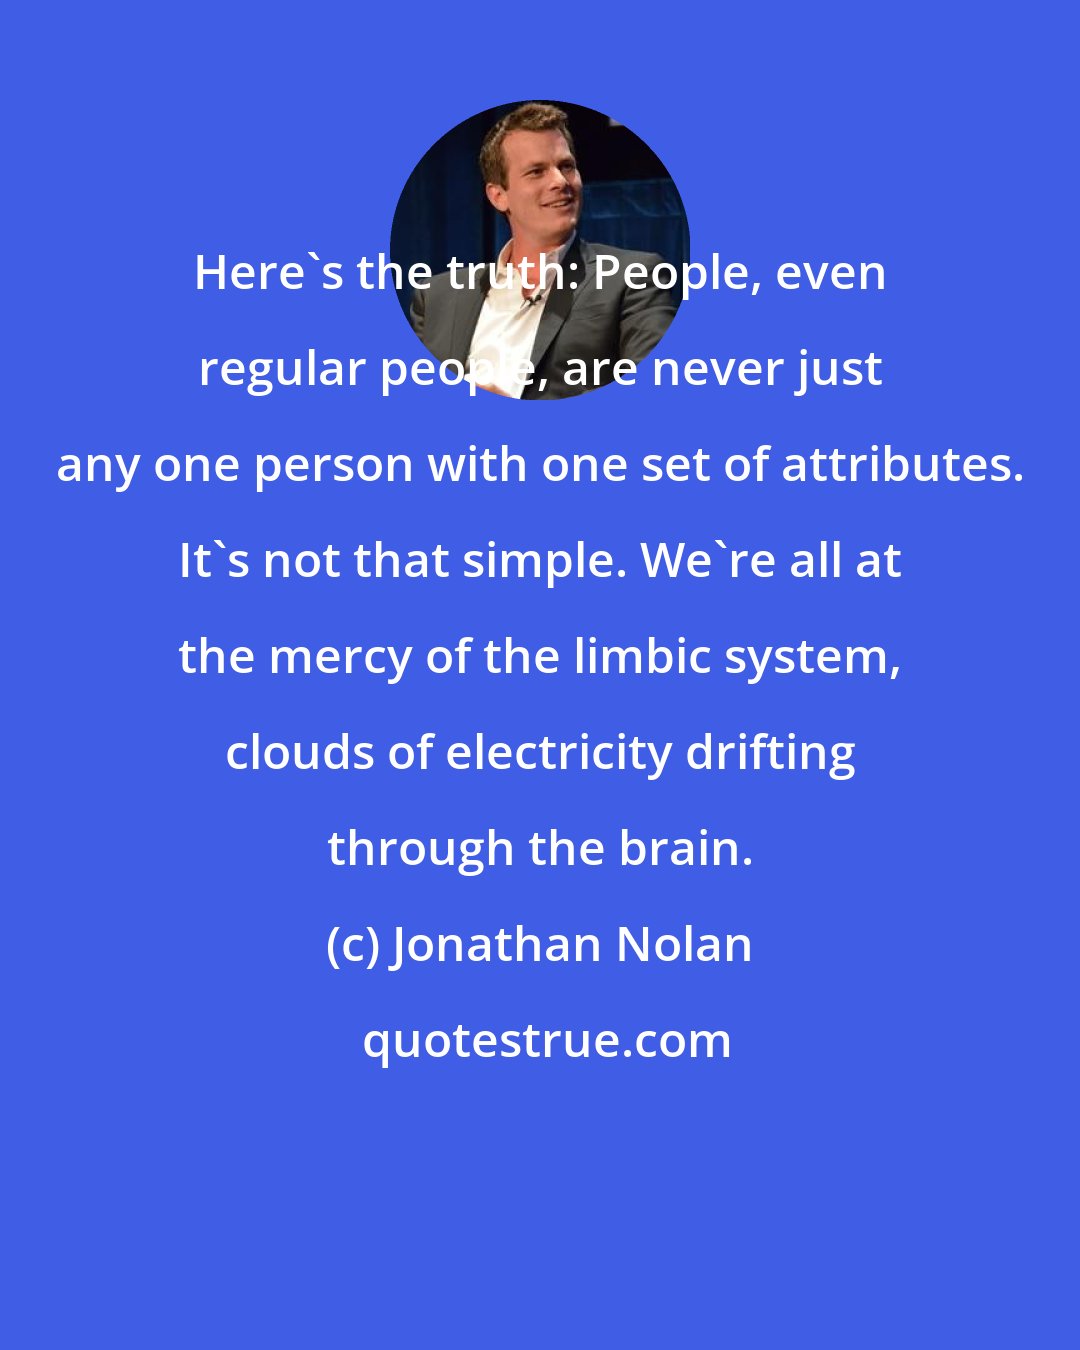 Jonathan Nolan: Here's the truth: People, even regular people, are never just any one person with one set of attributes. It's not that simple. We're all at the mercy of the limbic system, clouds of electricity drifting through the brain.